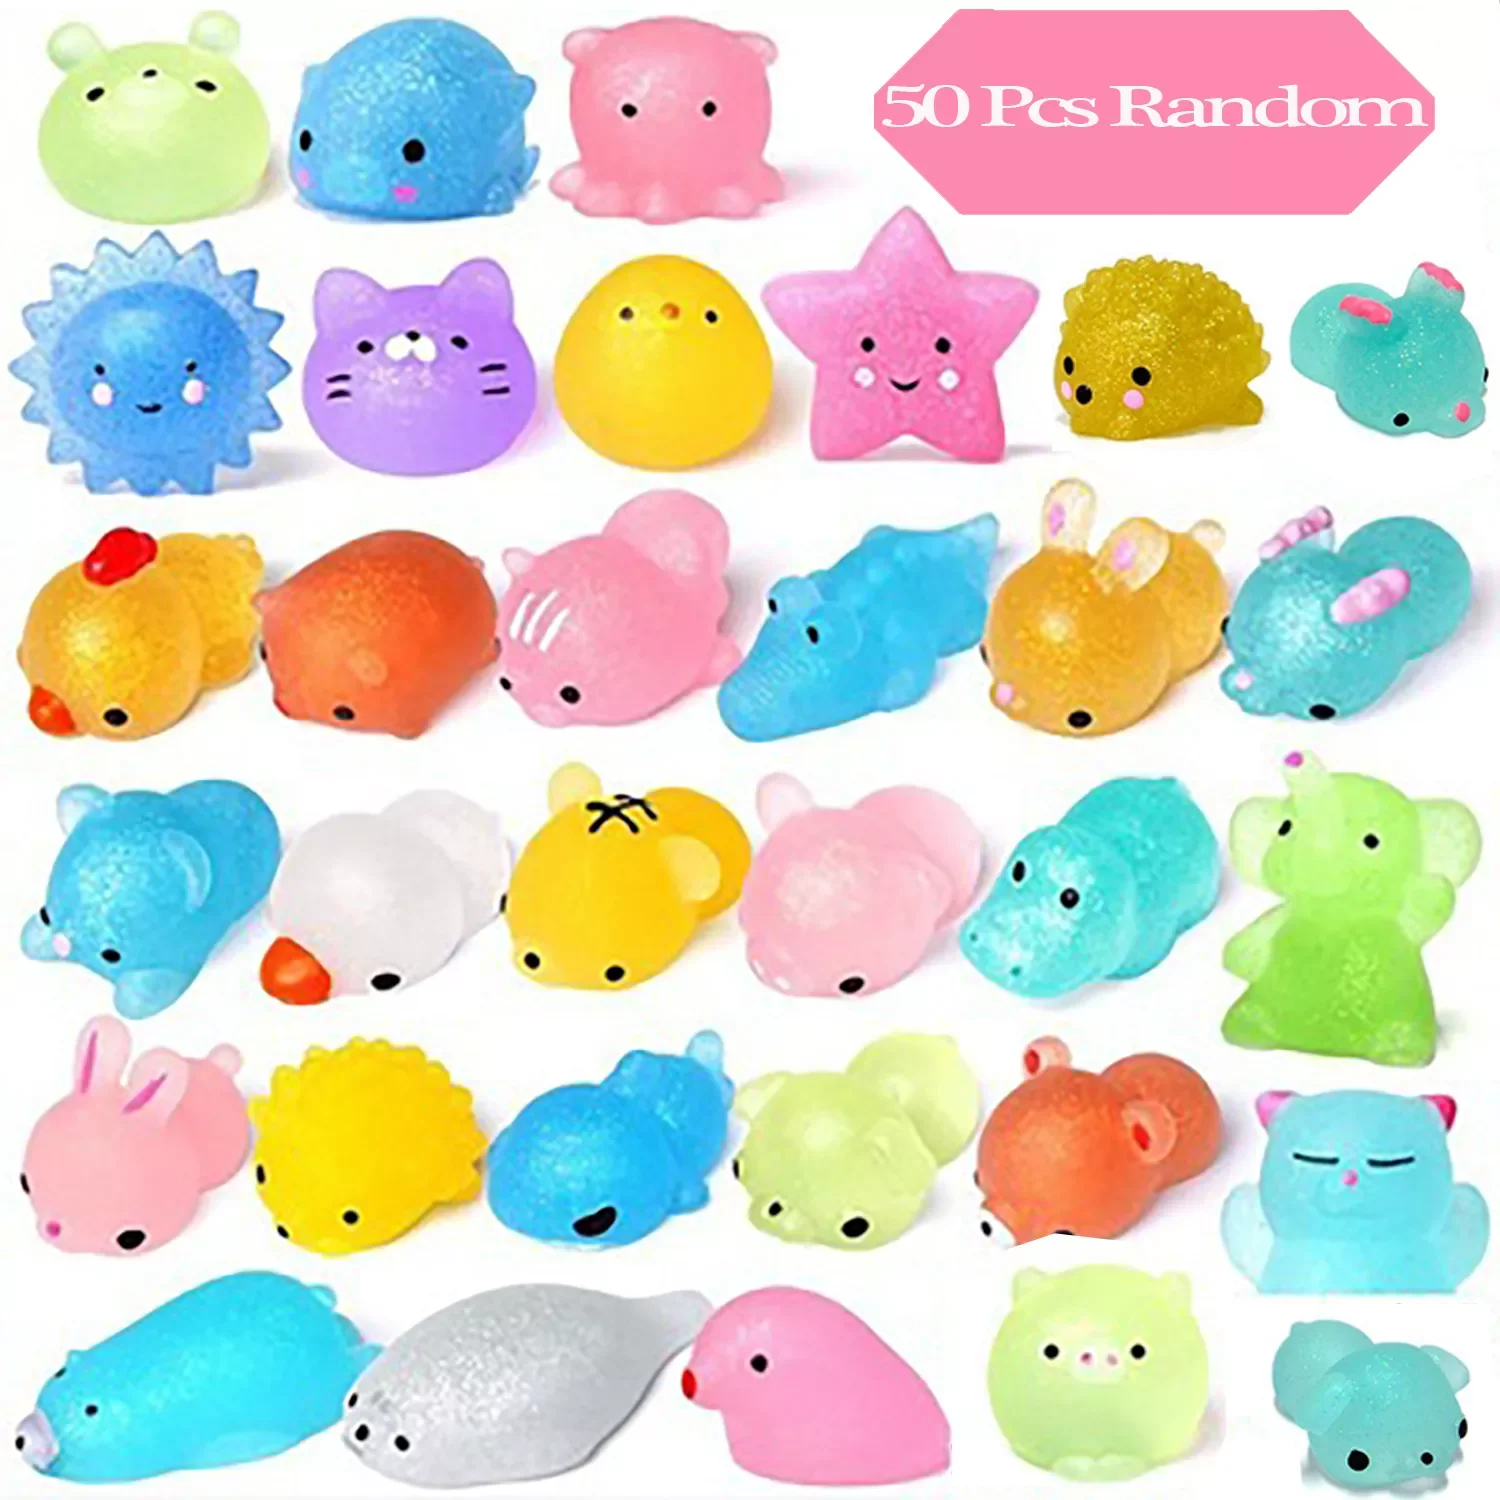 Glitter Mochi Squishy Toys Cute Kawaii Squishies Stress Relief Animal Squishys Party Favors for Kids Birthday Gifts